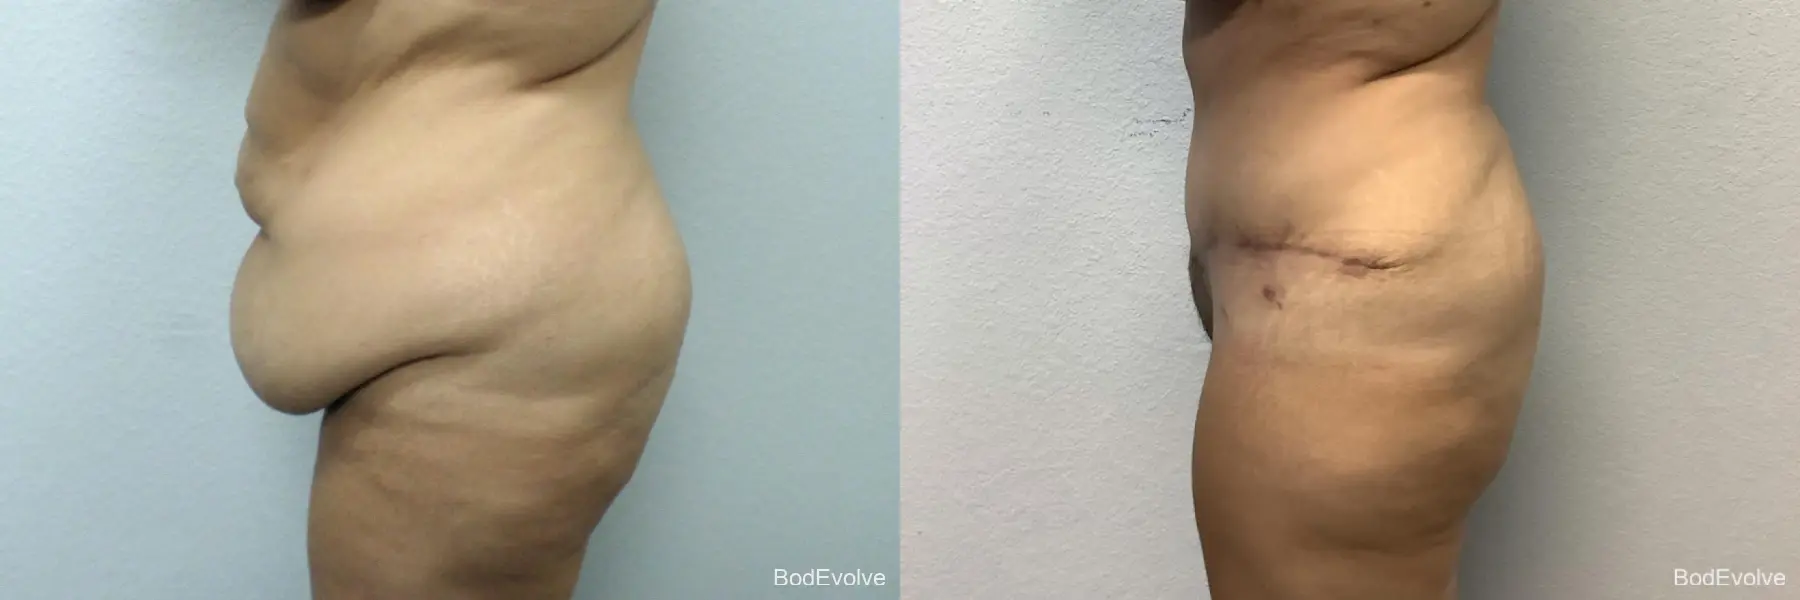 Tummy Tuck: Patient 5 - Before and After 2